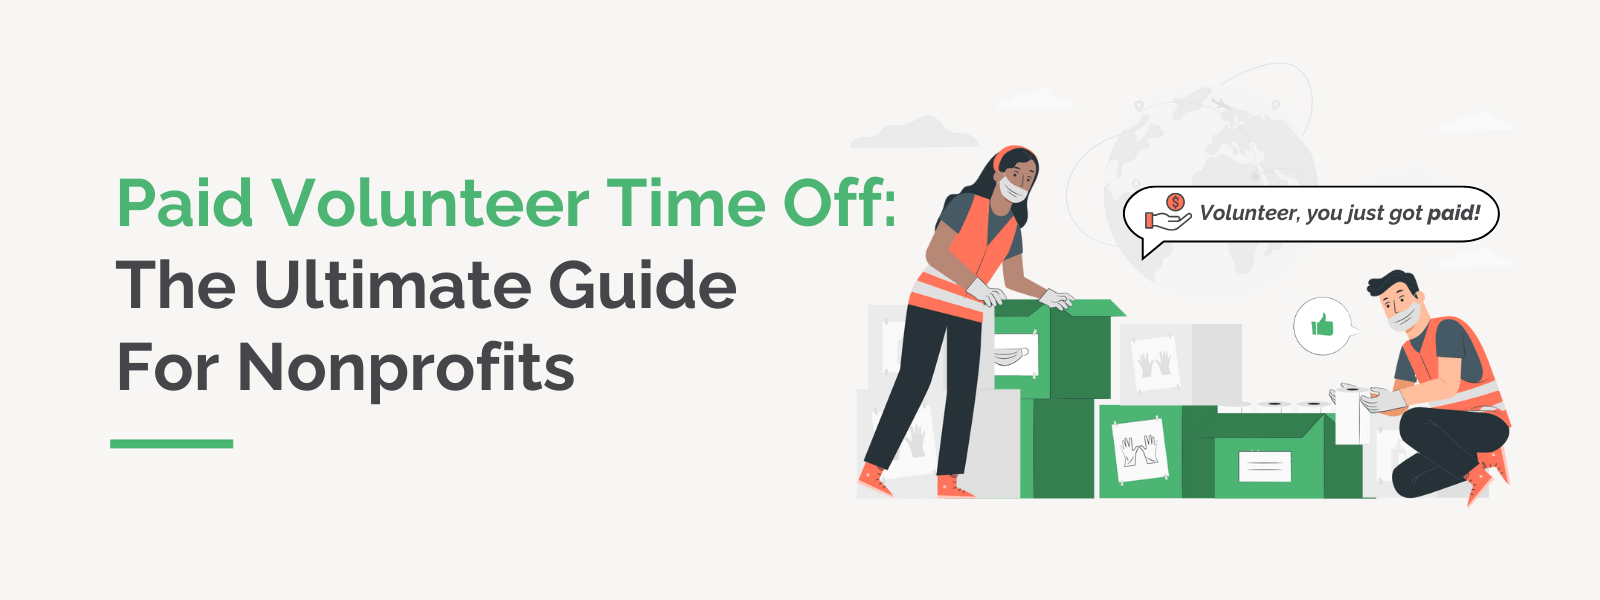 Paid Volunteer Time Off The Ultimate Guide For Nonprofits